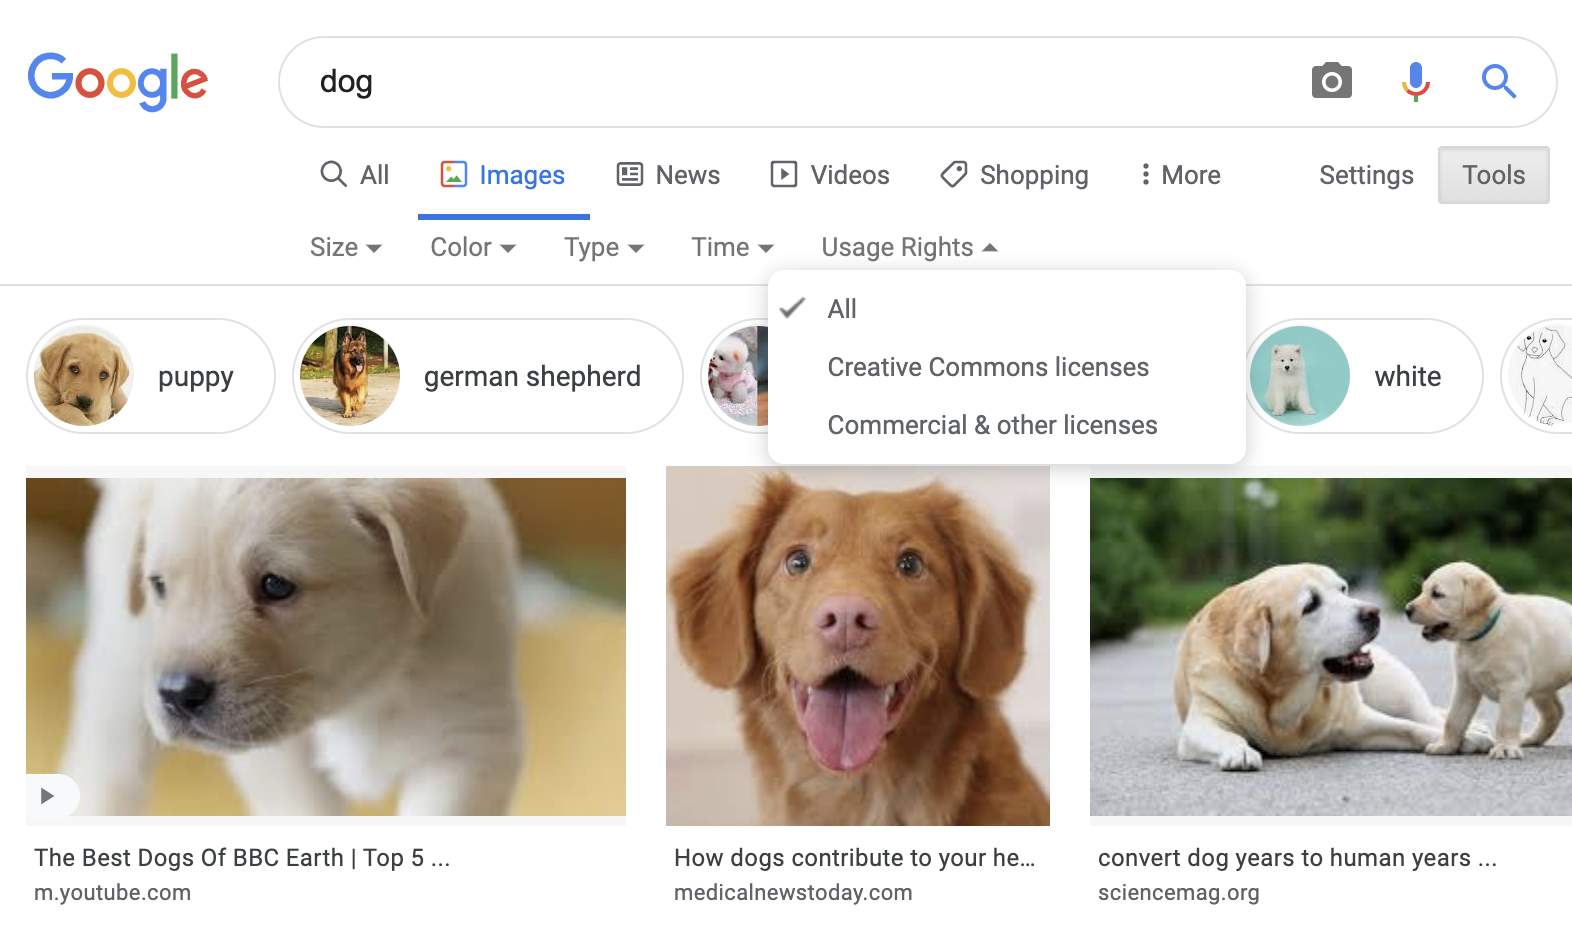 Google Removes 'Tagged for Reuse' Options from Image Search Tools